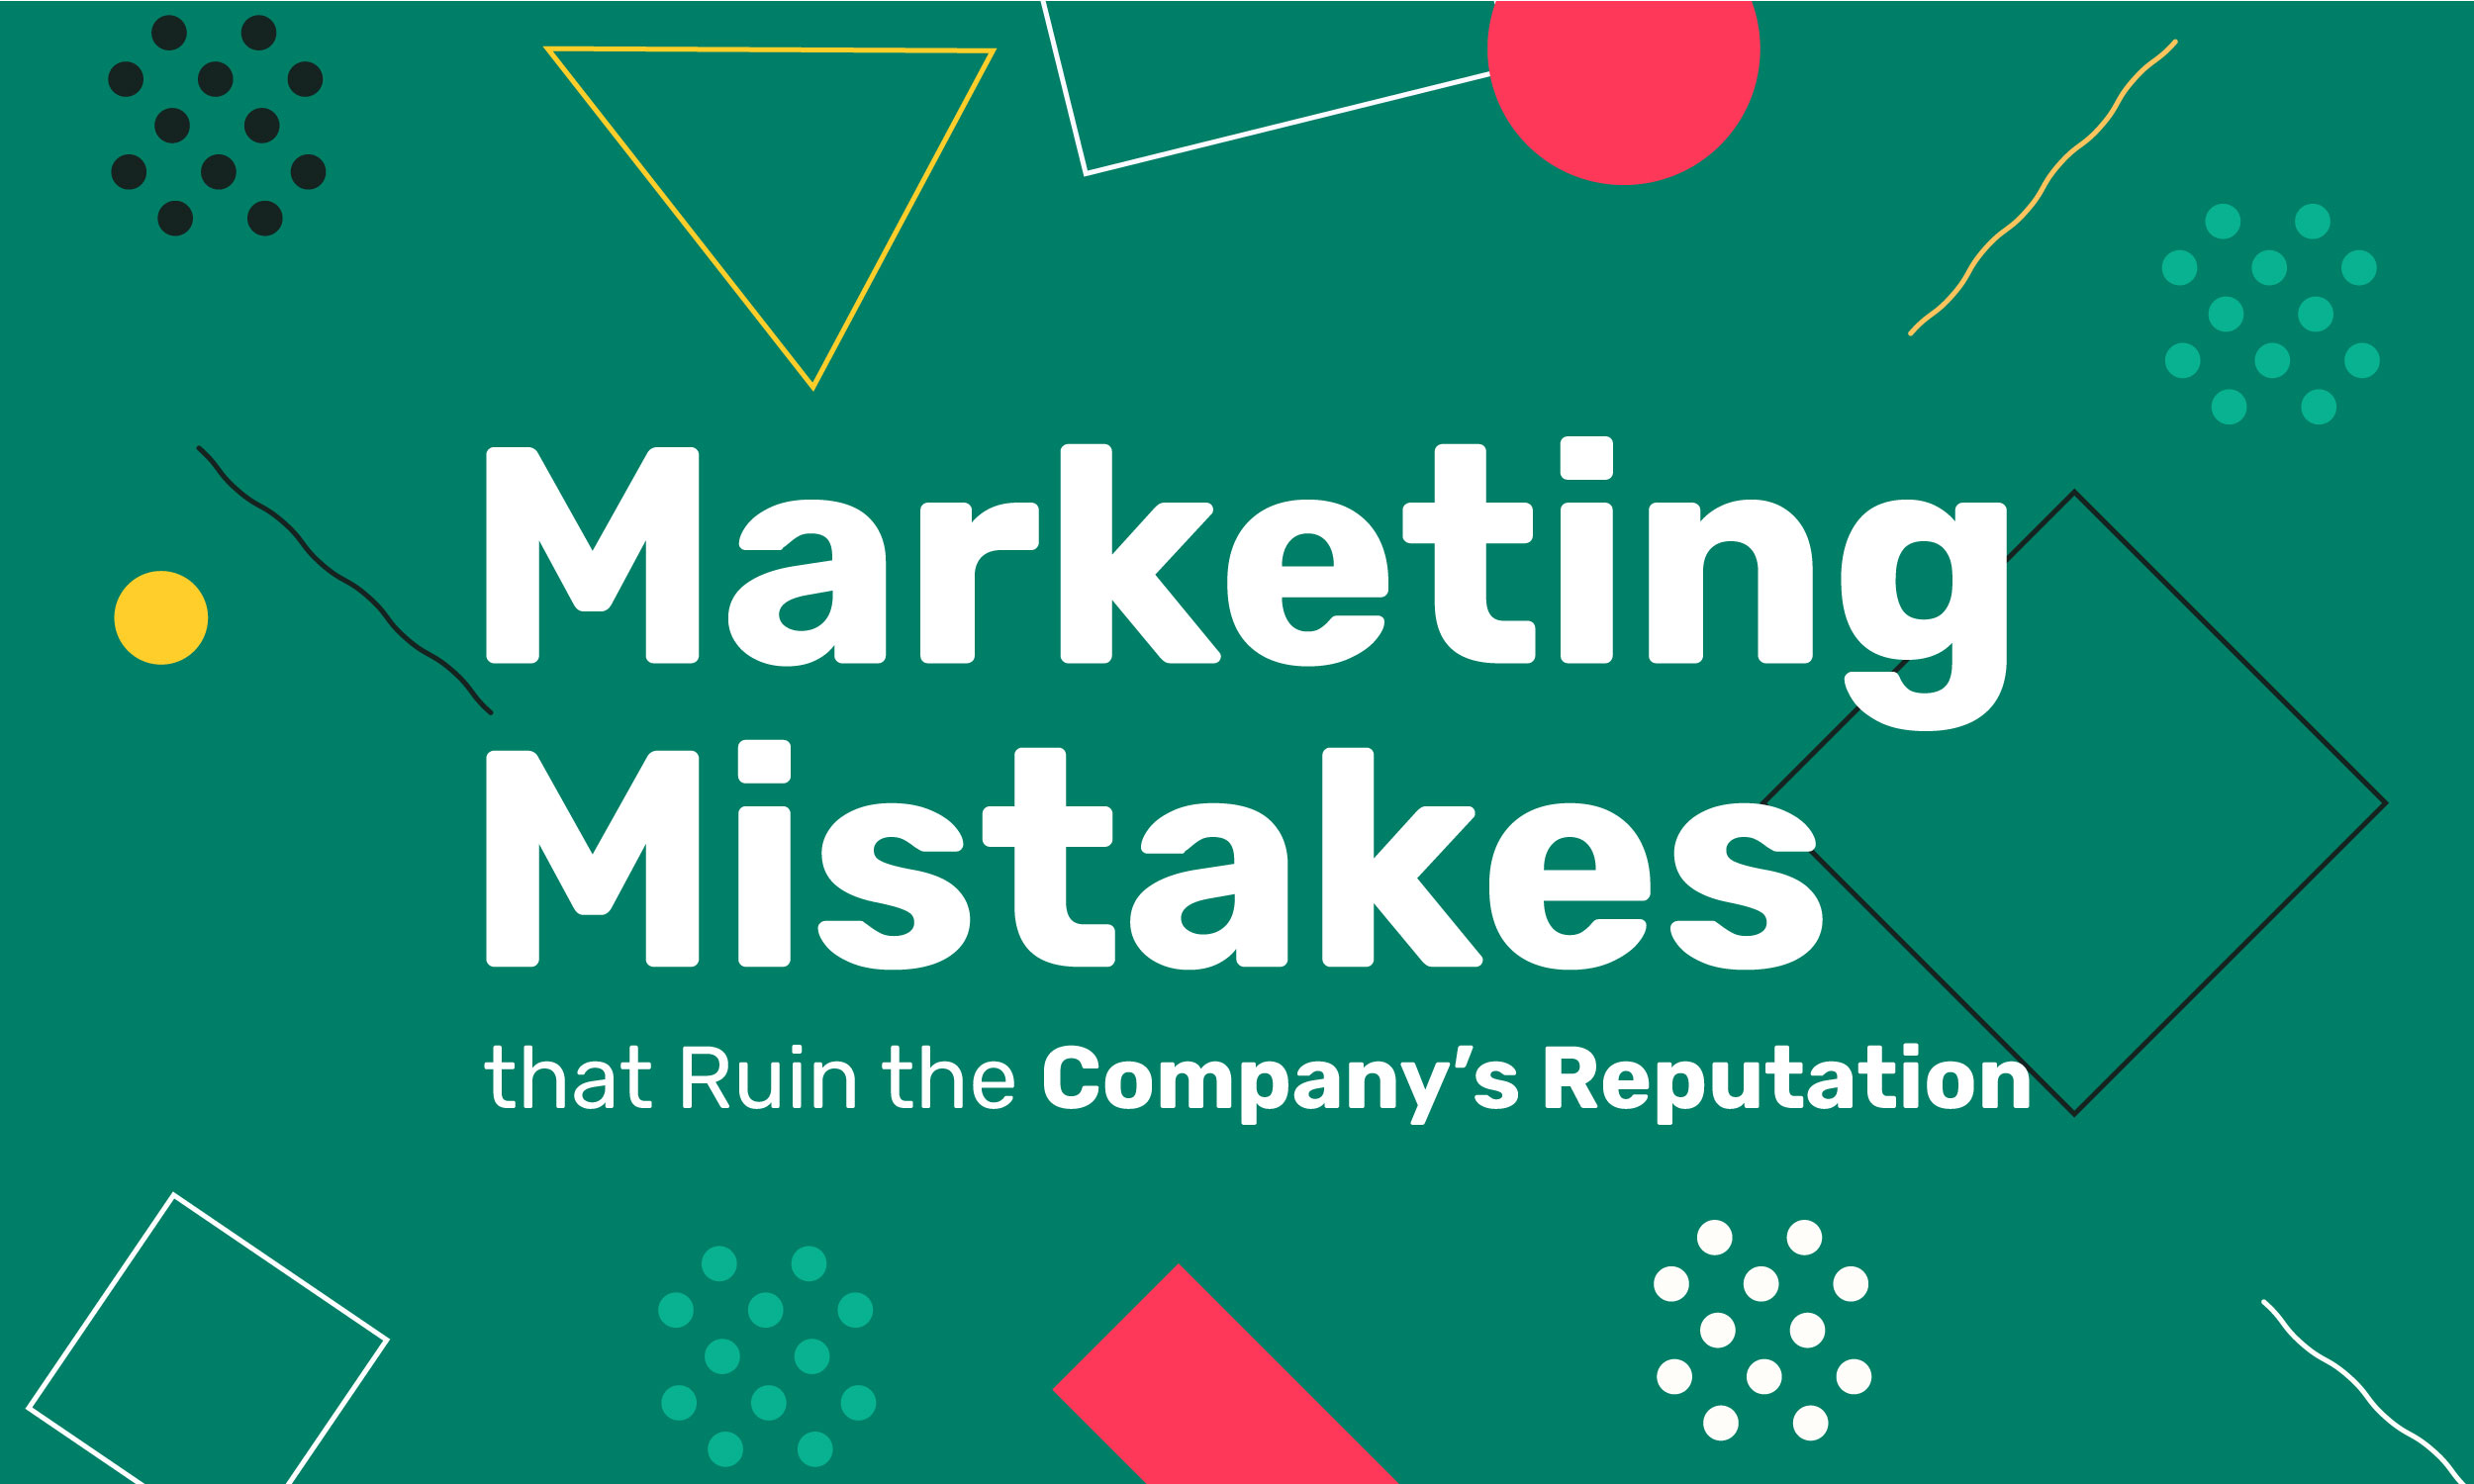 7 Online Marketing Mistakes that Ruin the Company’s Reputation